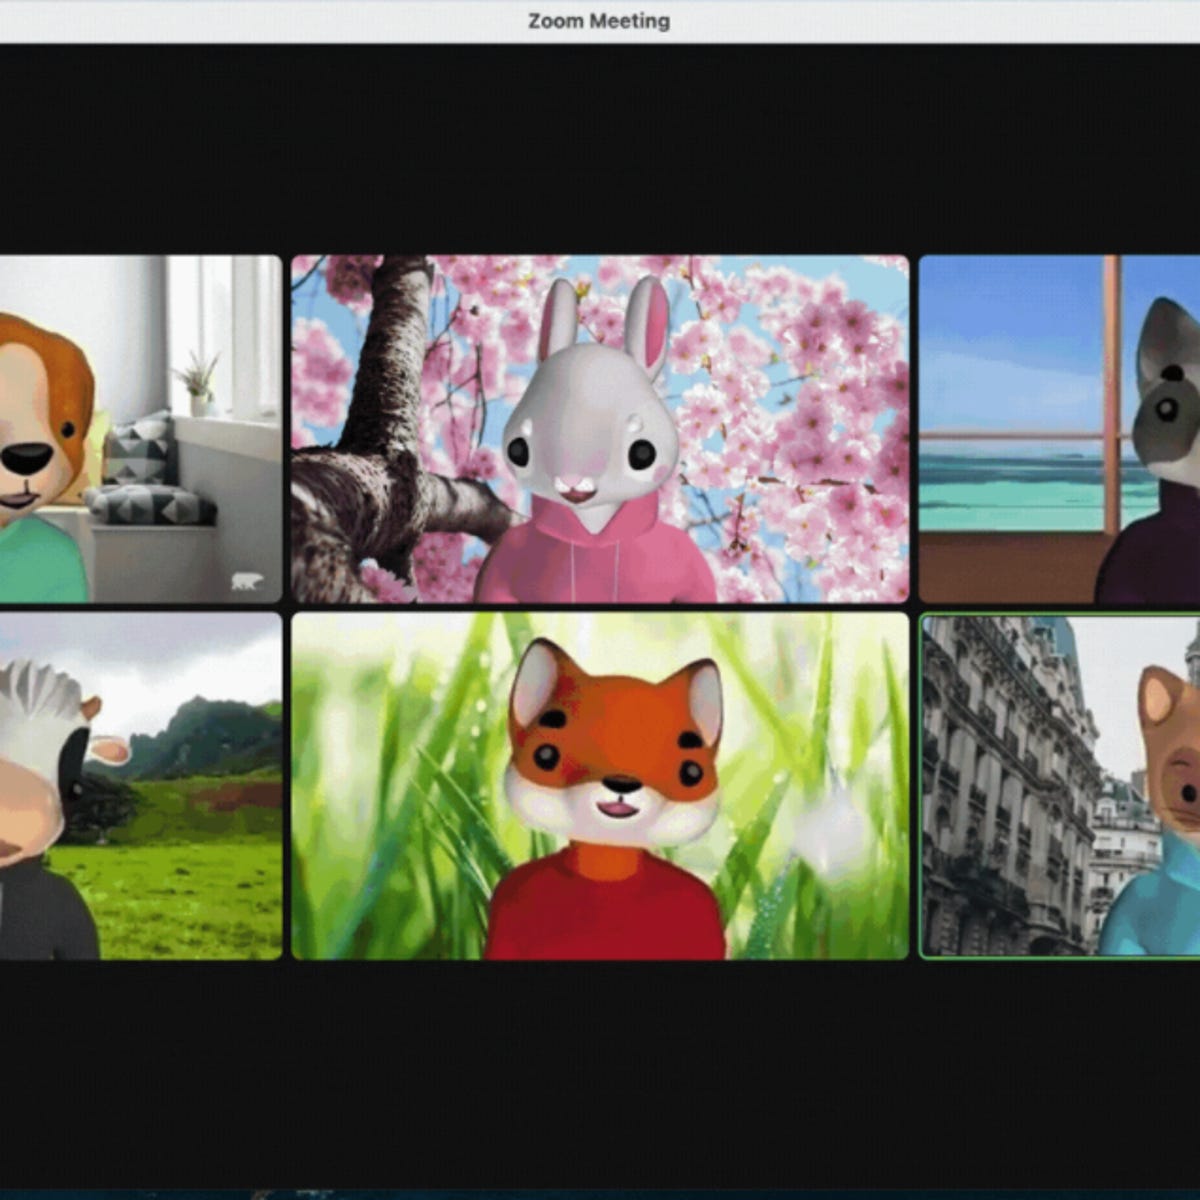 Zoom's New Avatars Let You Show Up to Meetings as an Animated Bunny - CNET